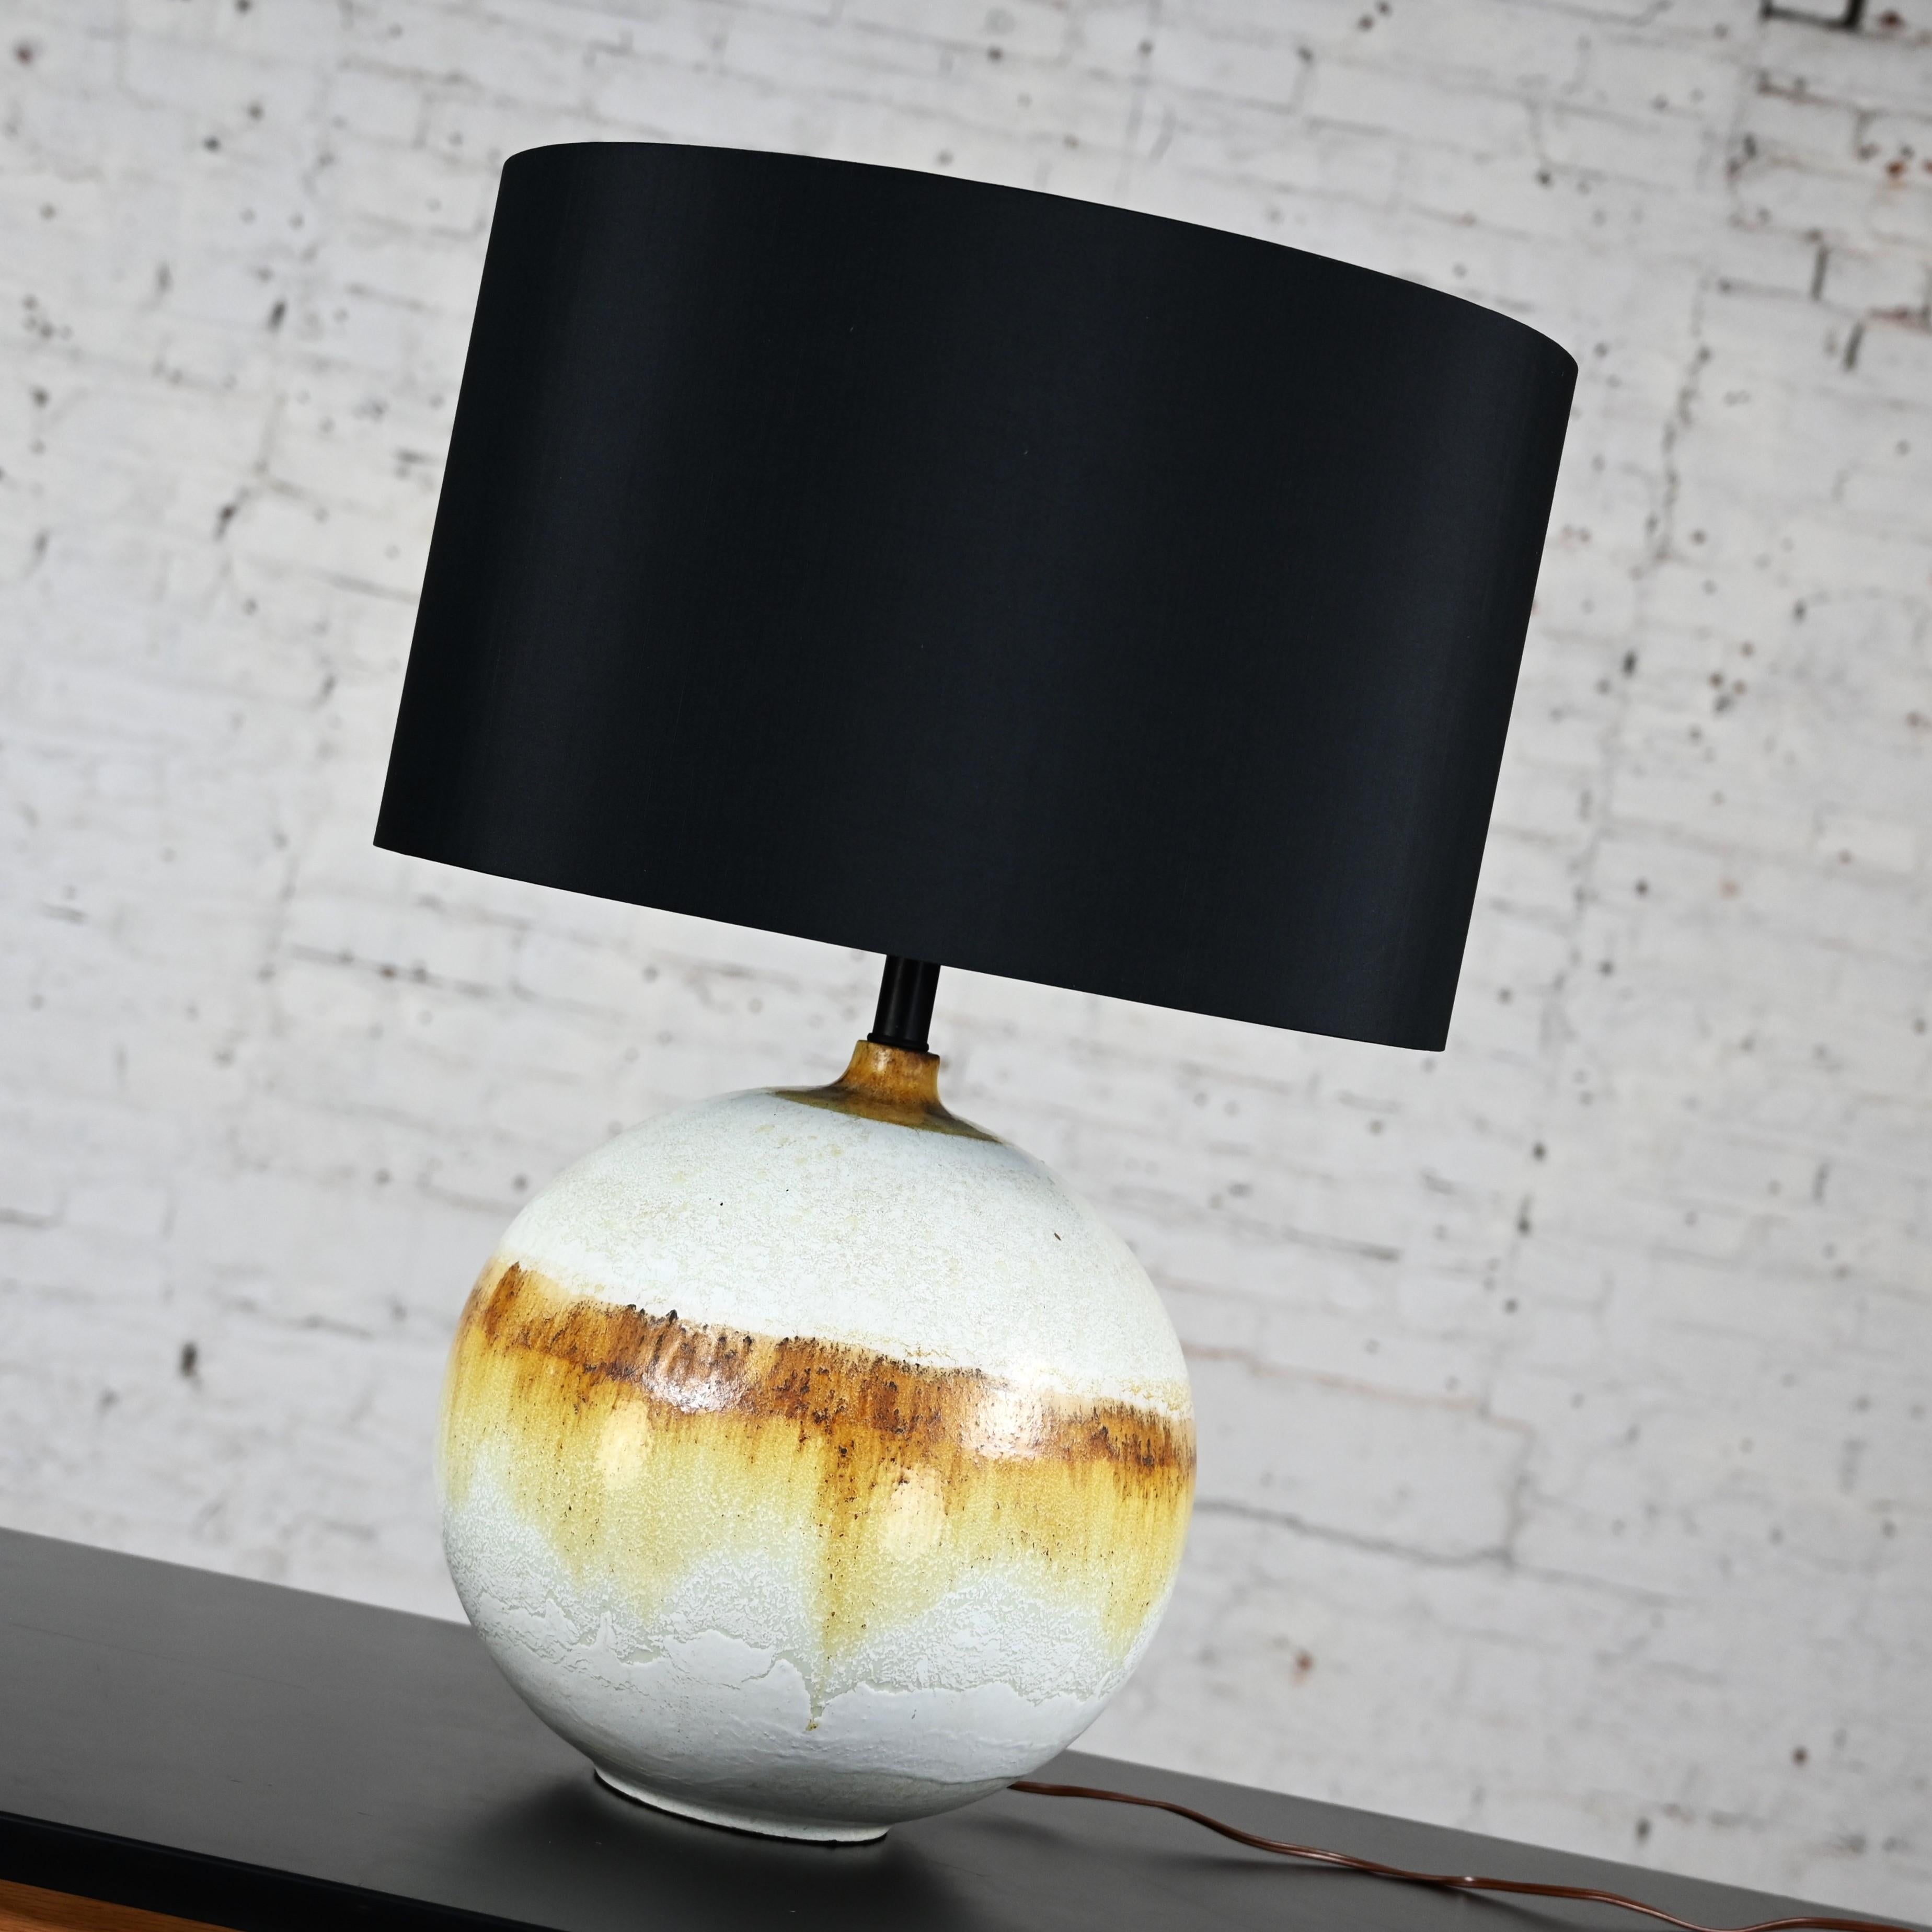 Mid-20th Century MCM Drip Glaze Ceramic Ball Lamp with New Black Shade For Sale 1